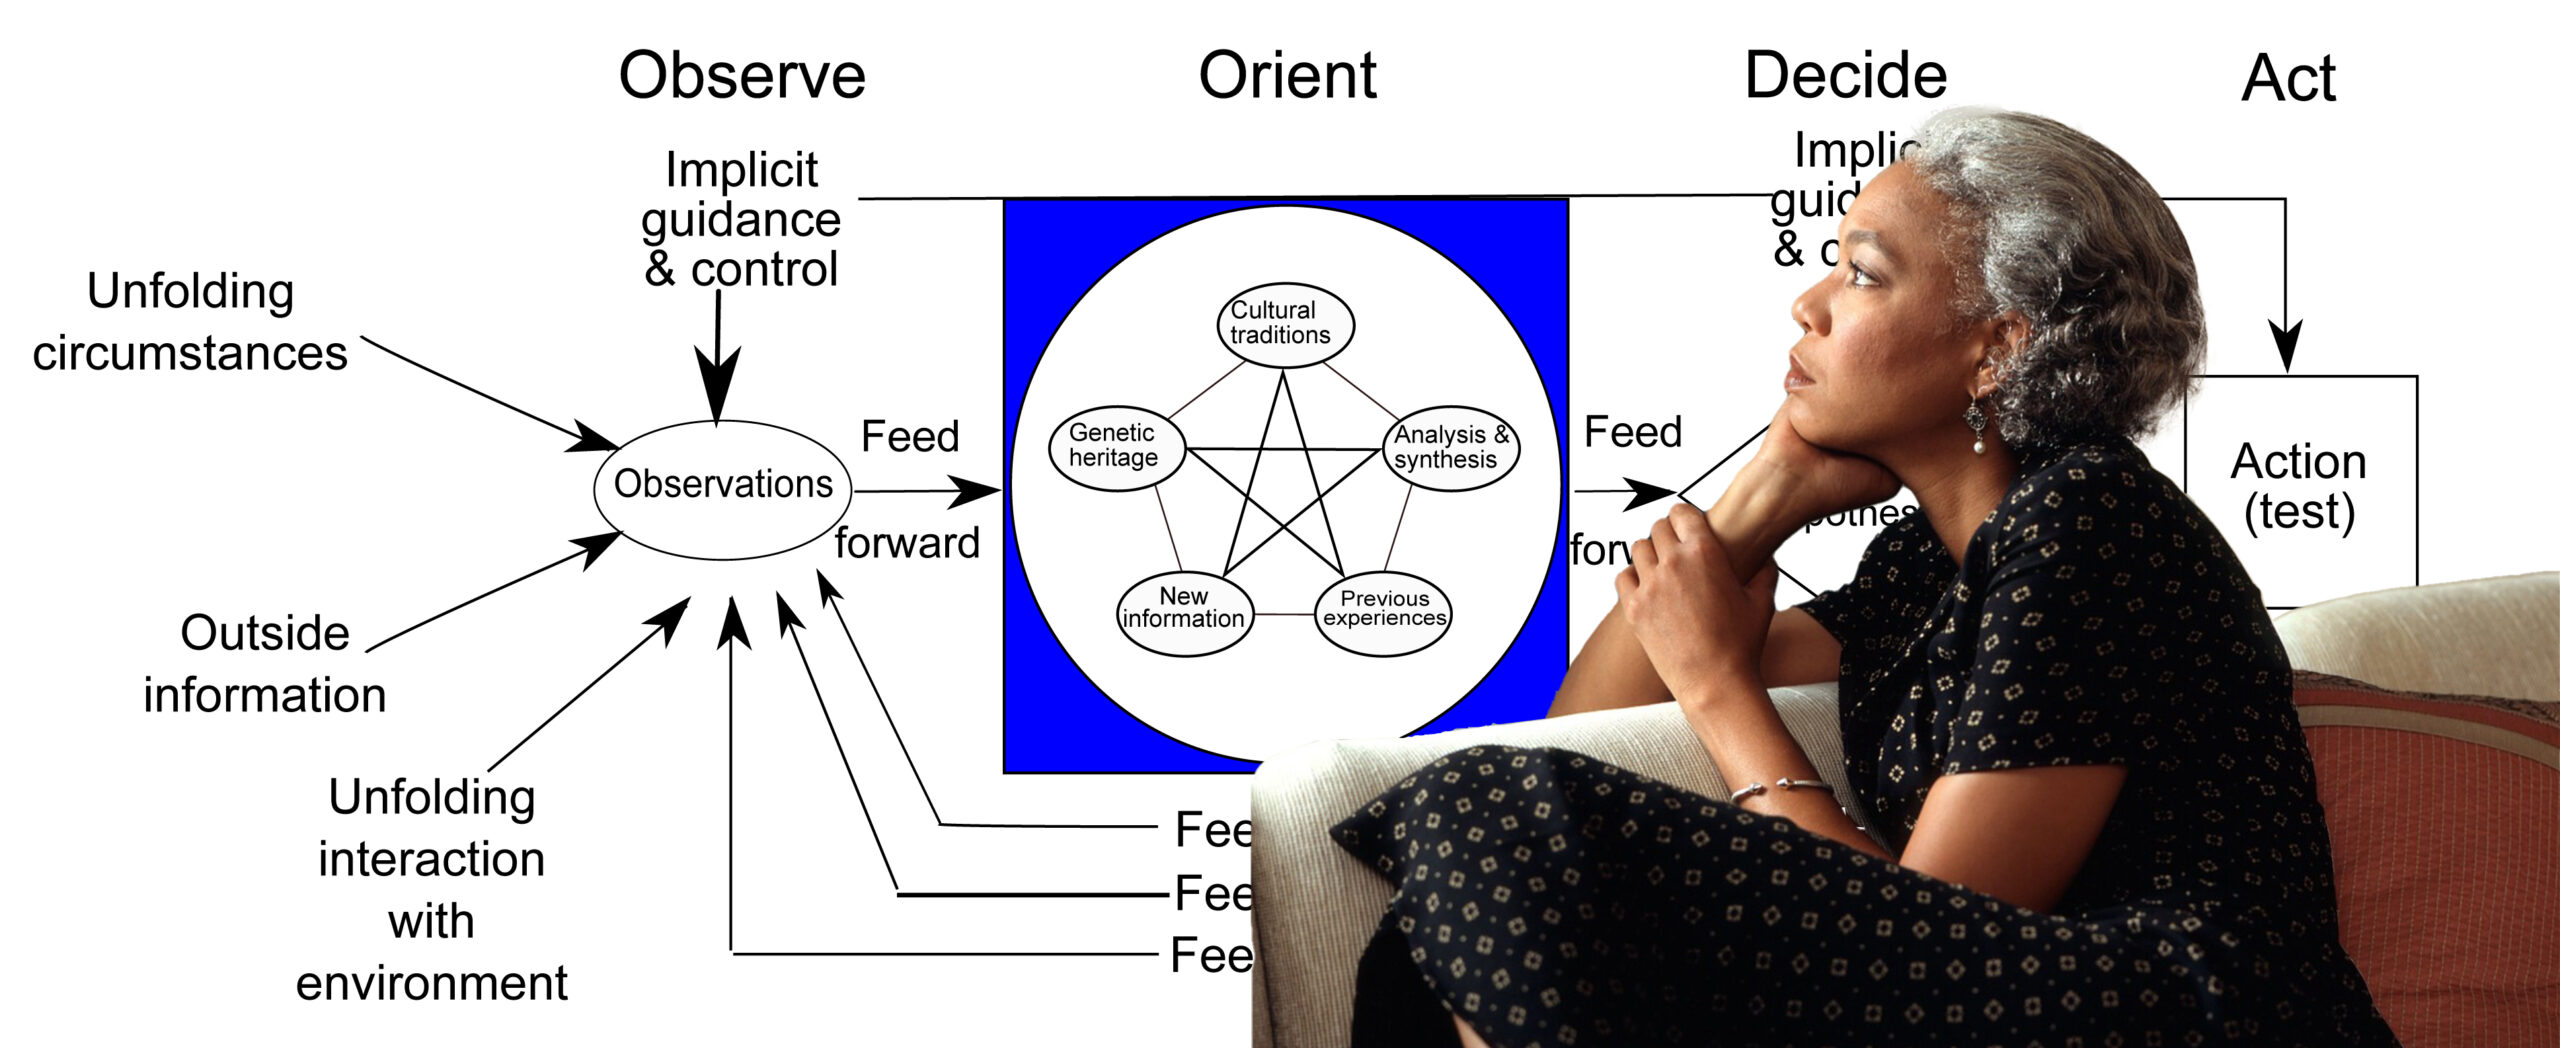 The OODA Loop: Learn faster and smarter while slowing impediments